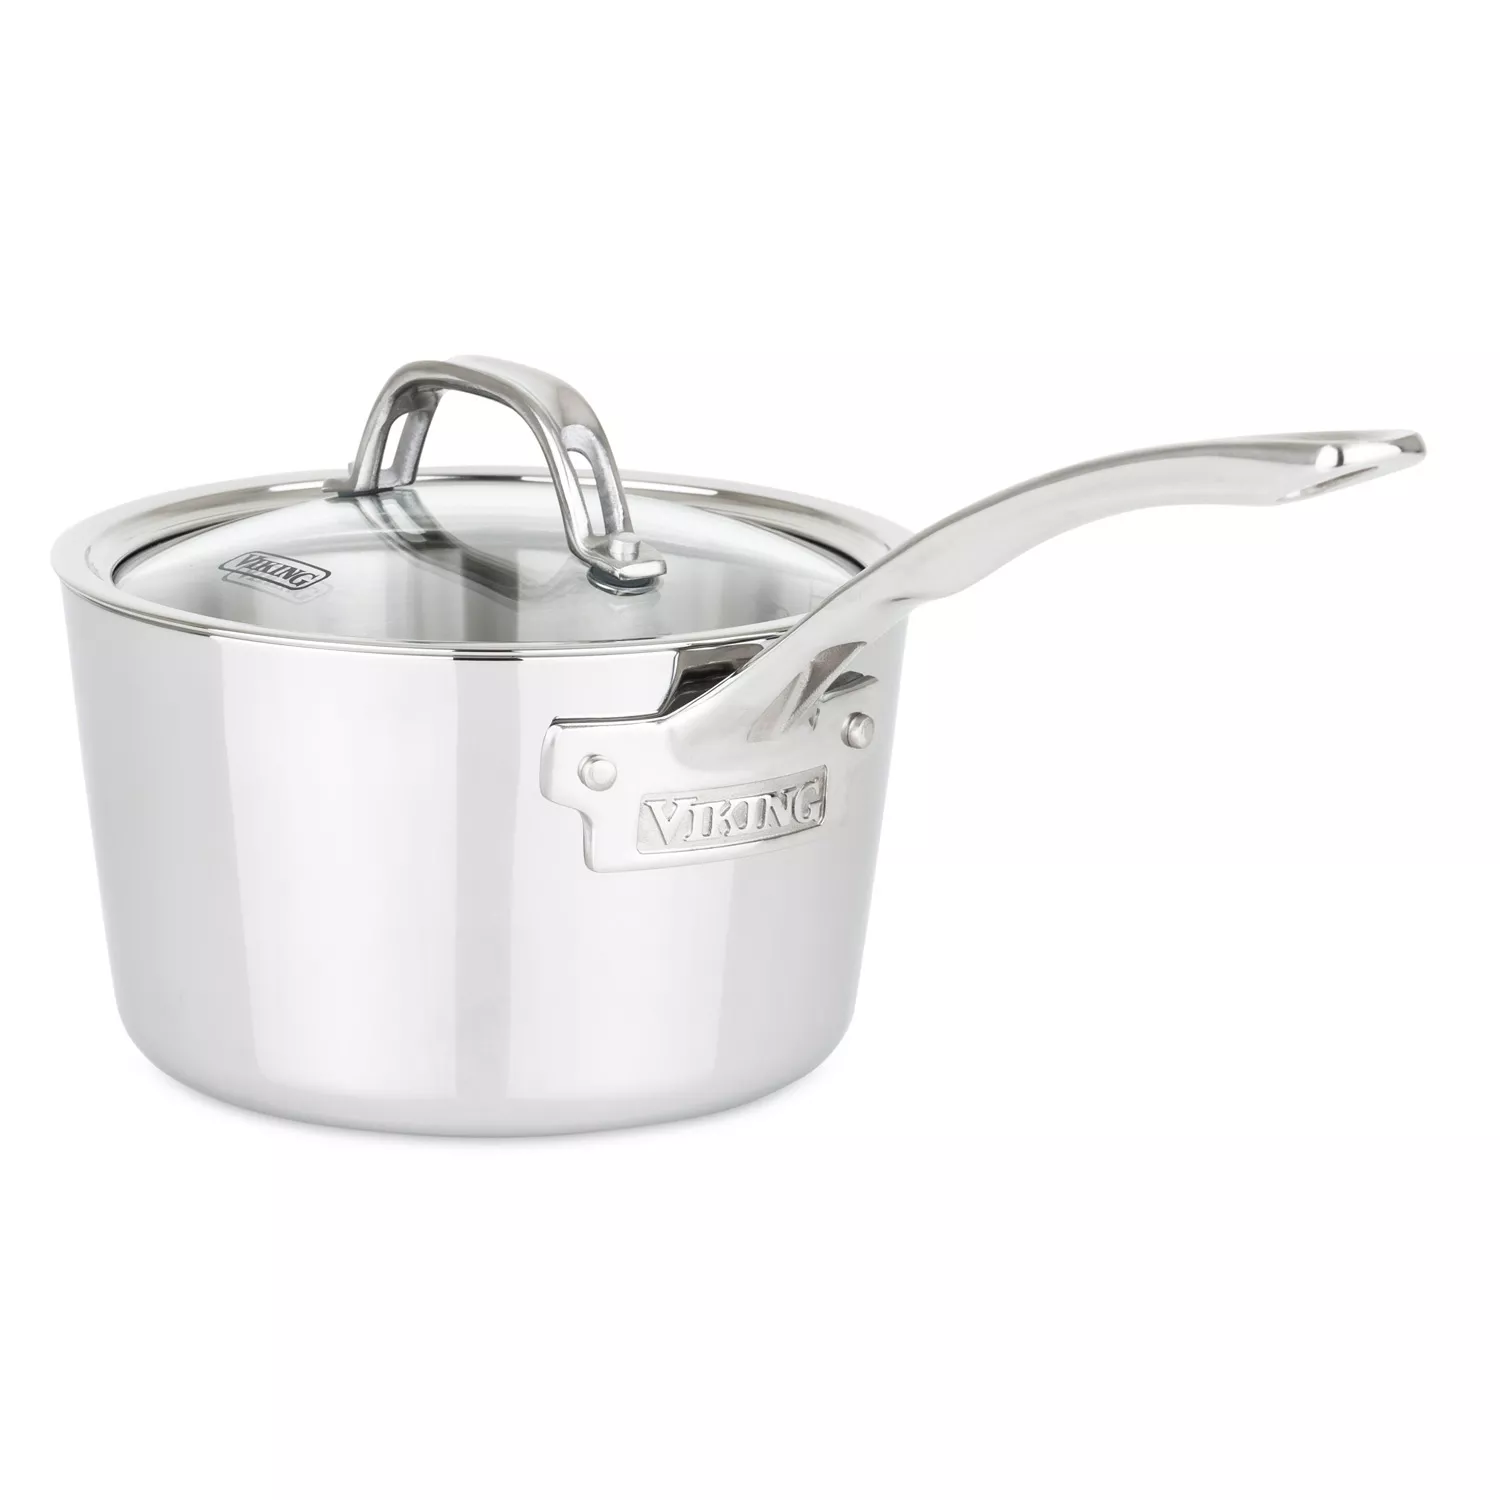 Viking - Professional 5-Ply 3.4-Quart Casserole Pan - Stainless Steel